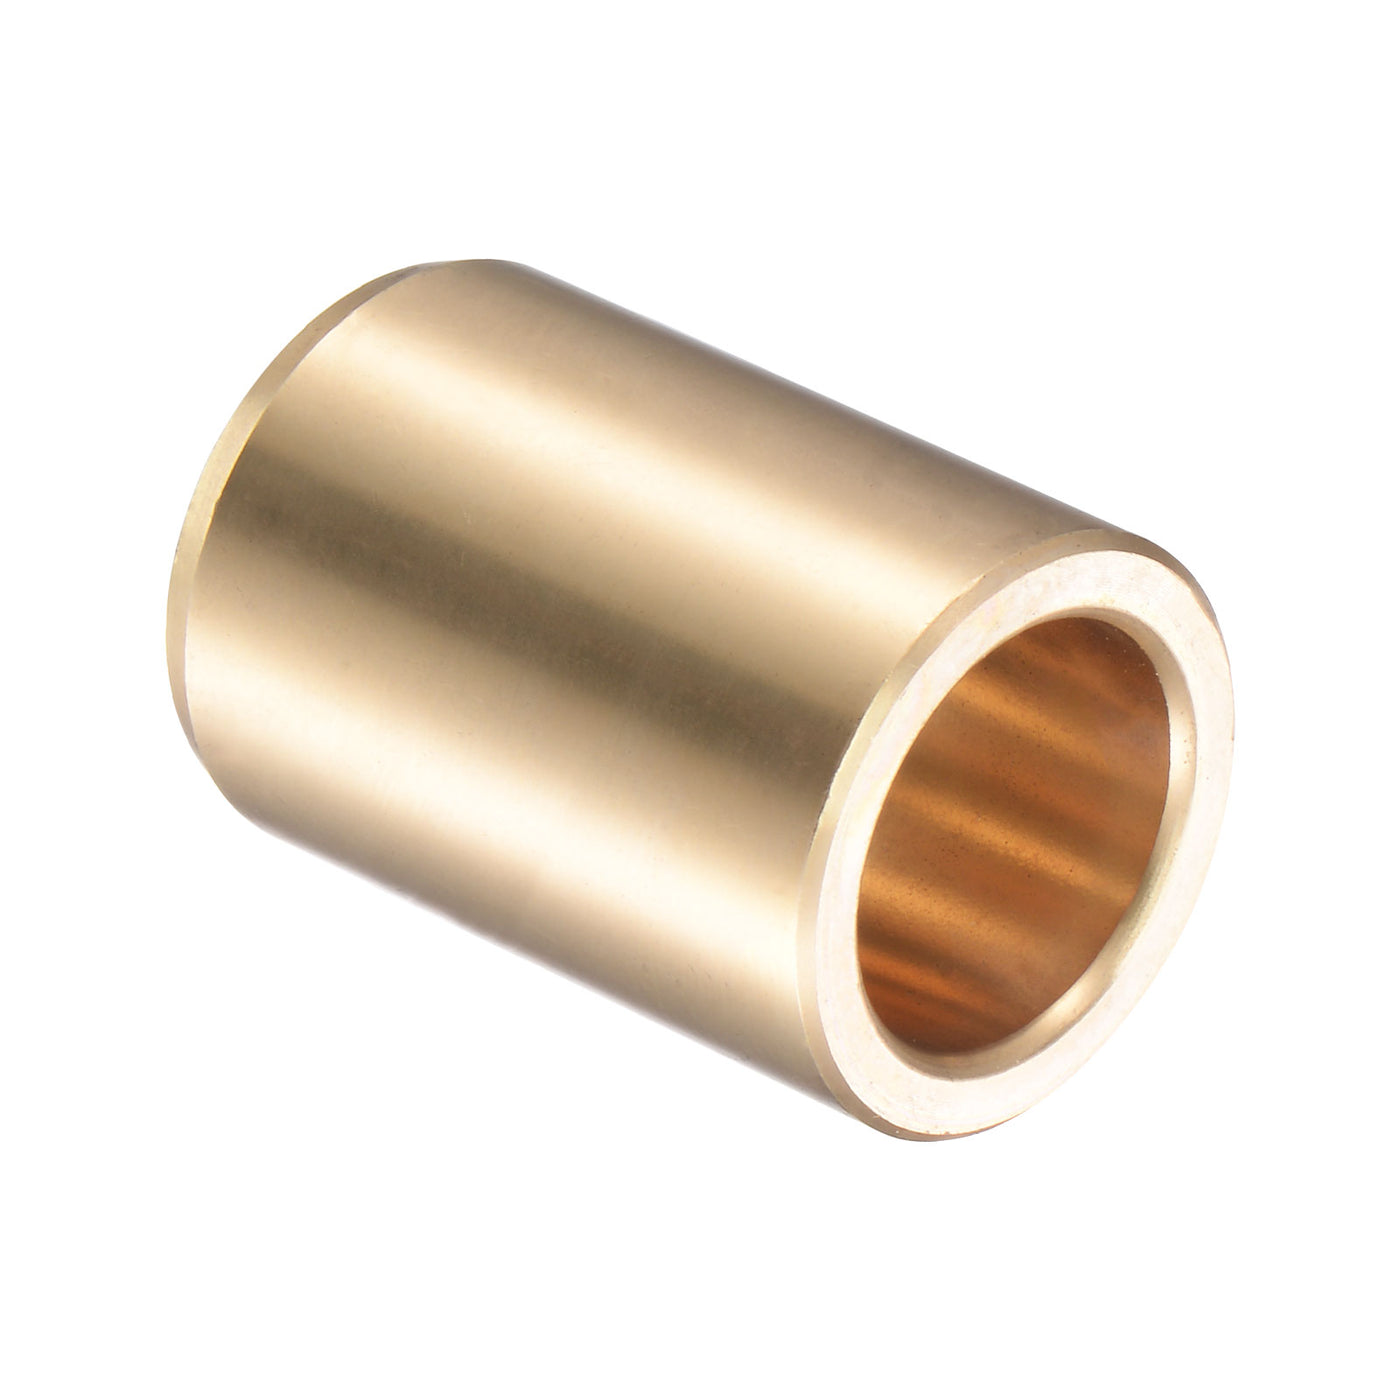 uxcell Uxcell Sleeve Bearings Cast Brass Self-Lubricating Bushing